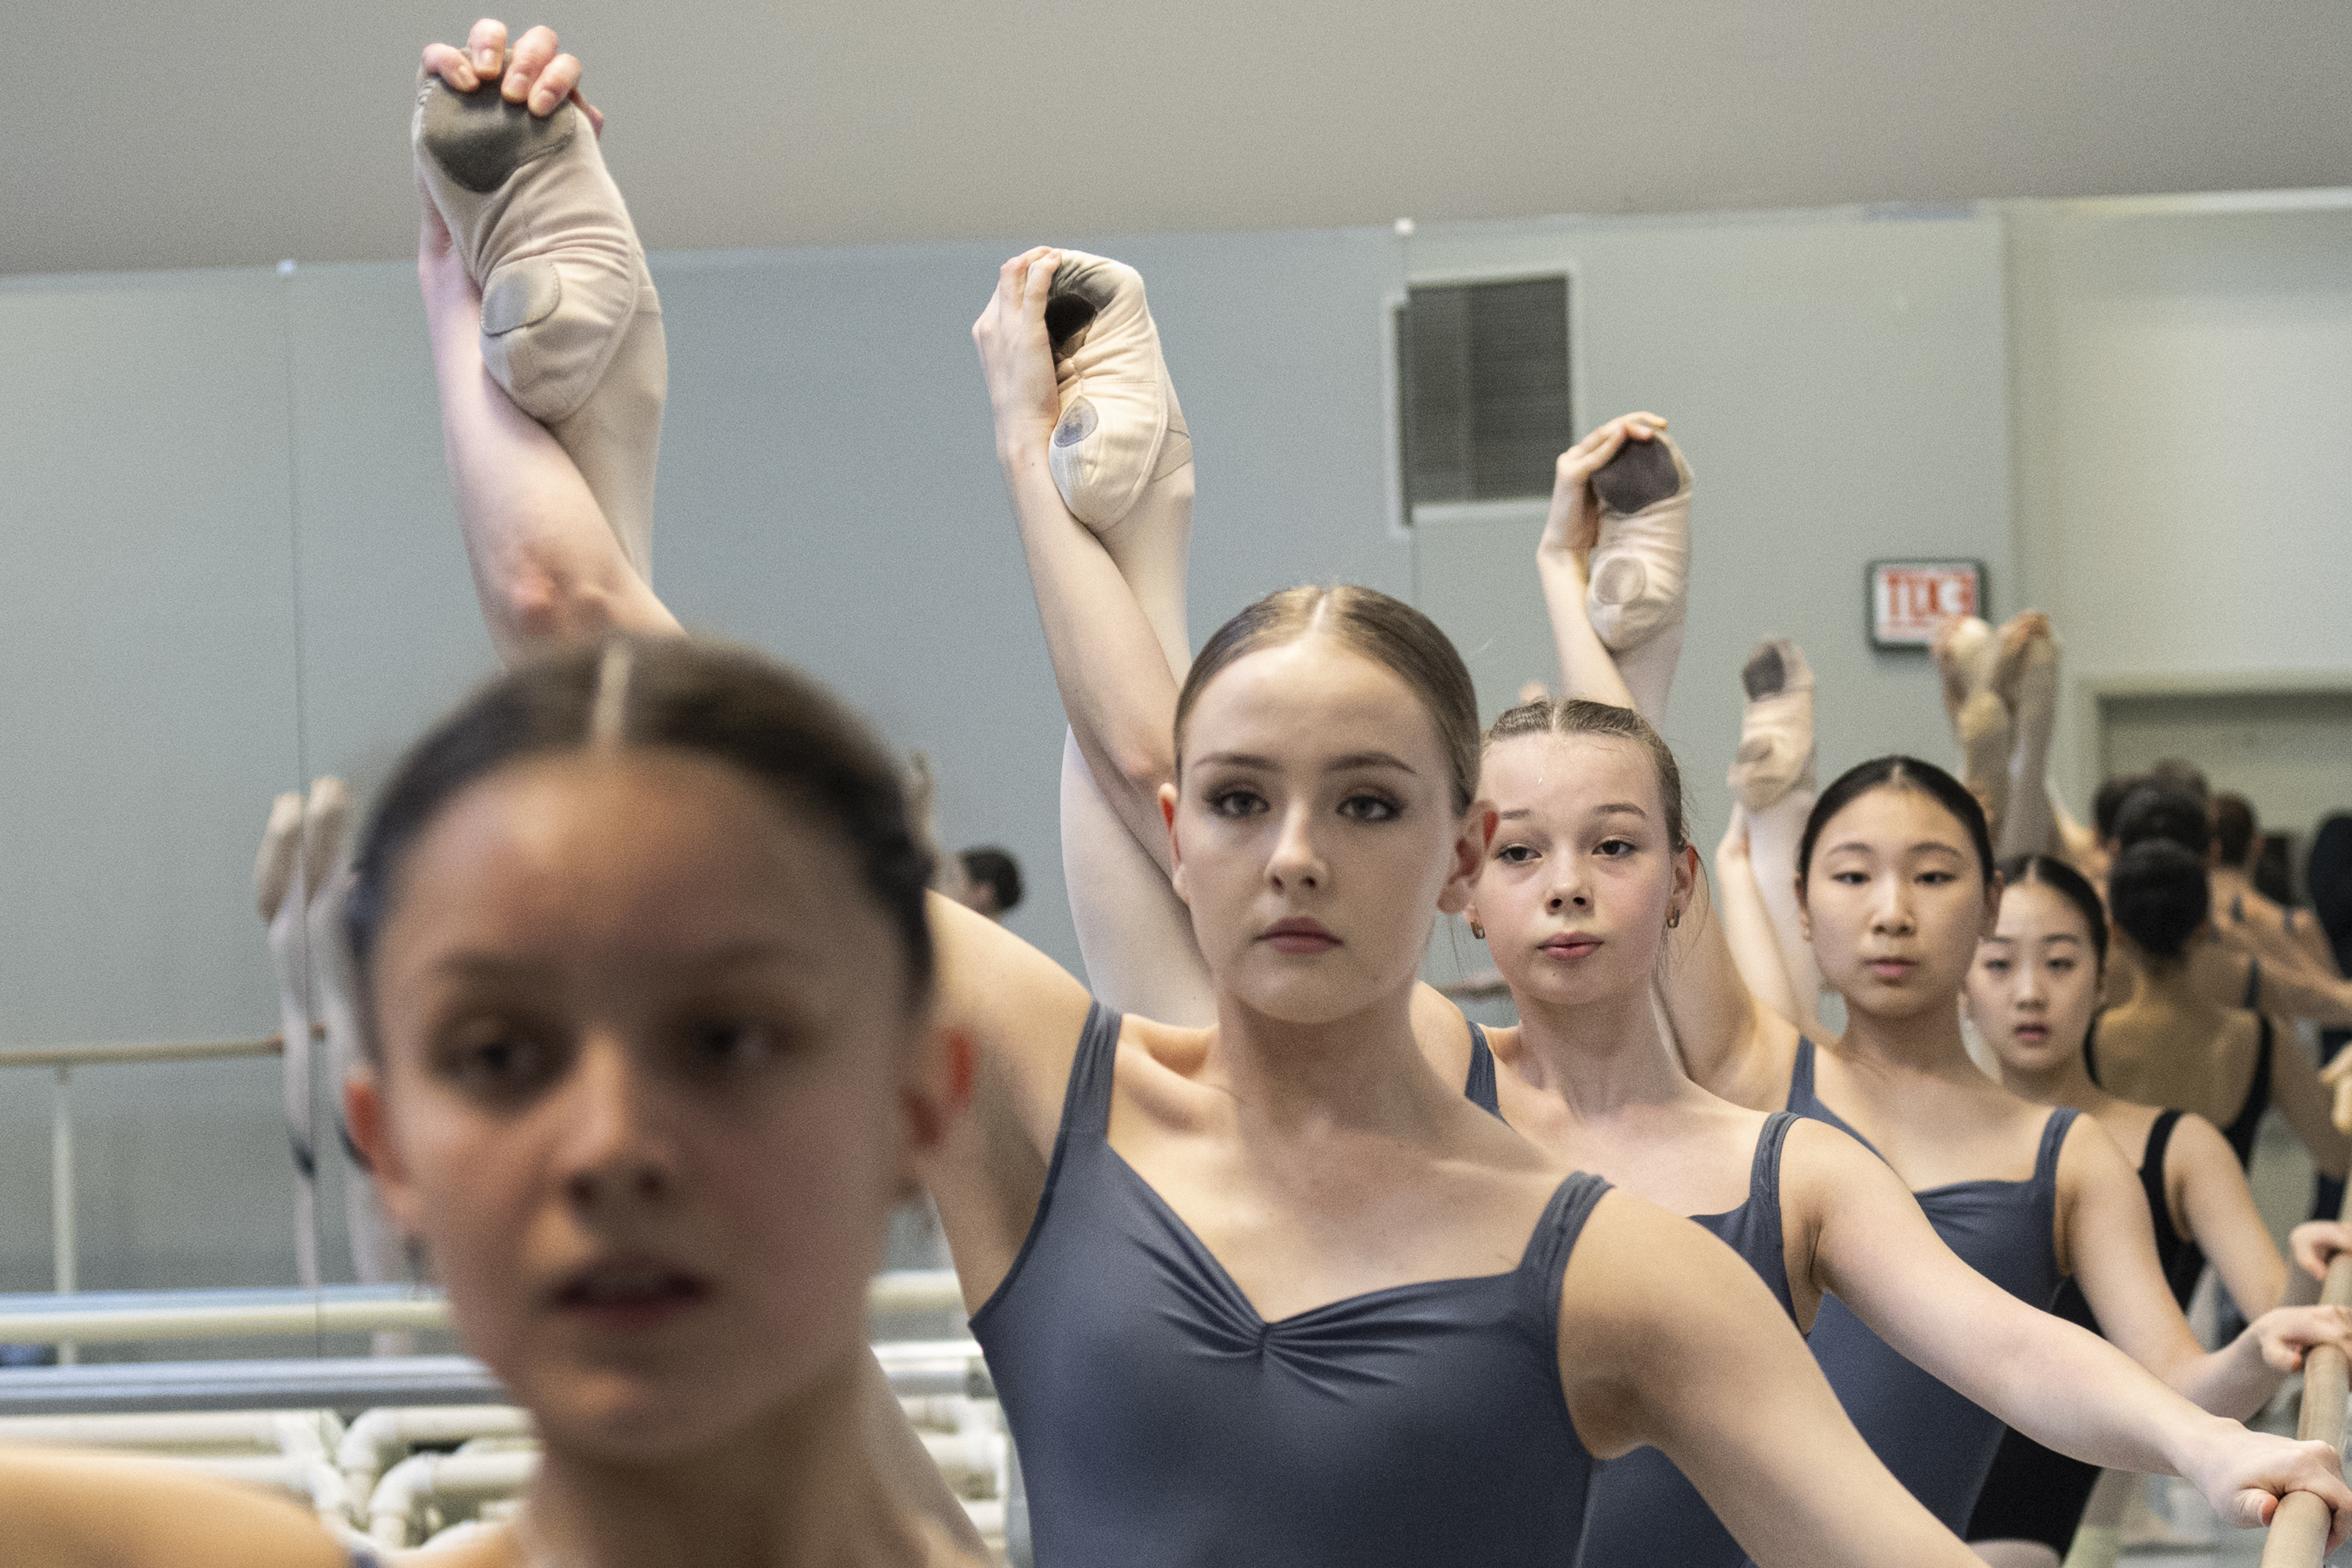 Ukrainian ballet students find safety and high-quality training far from home at Phillys Rock School